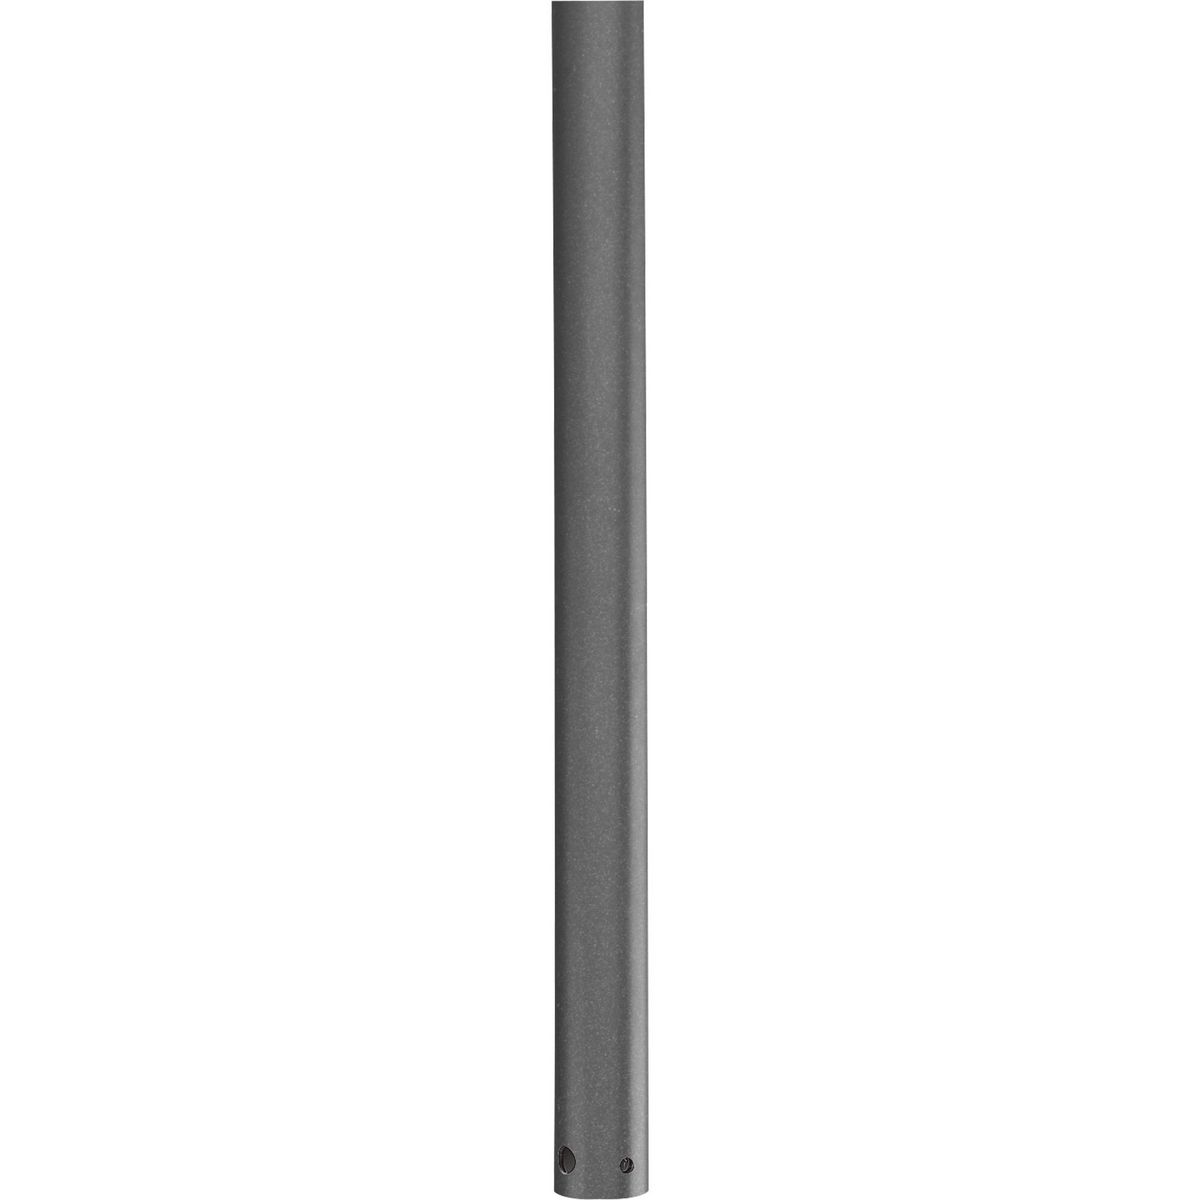 3/4 In. x 48 In. downrod for use with any Progress Lighting ceiling fan. Use of a fan downrod positions your ceiling fan at the optimal height for air circulation and provides the perfect solution for installation on high cathedral ceilings or in great rooms. Refer to the selection guide for recommended downrod lengths based upon your ceiling height. Graphite finish.